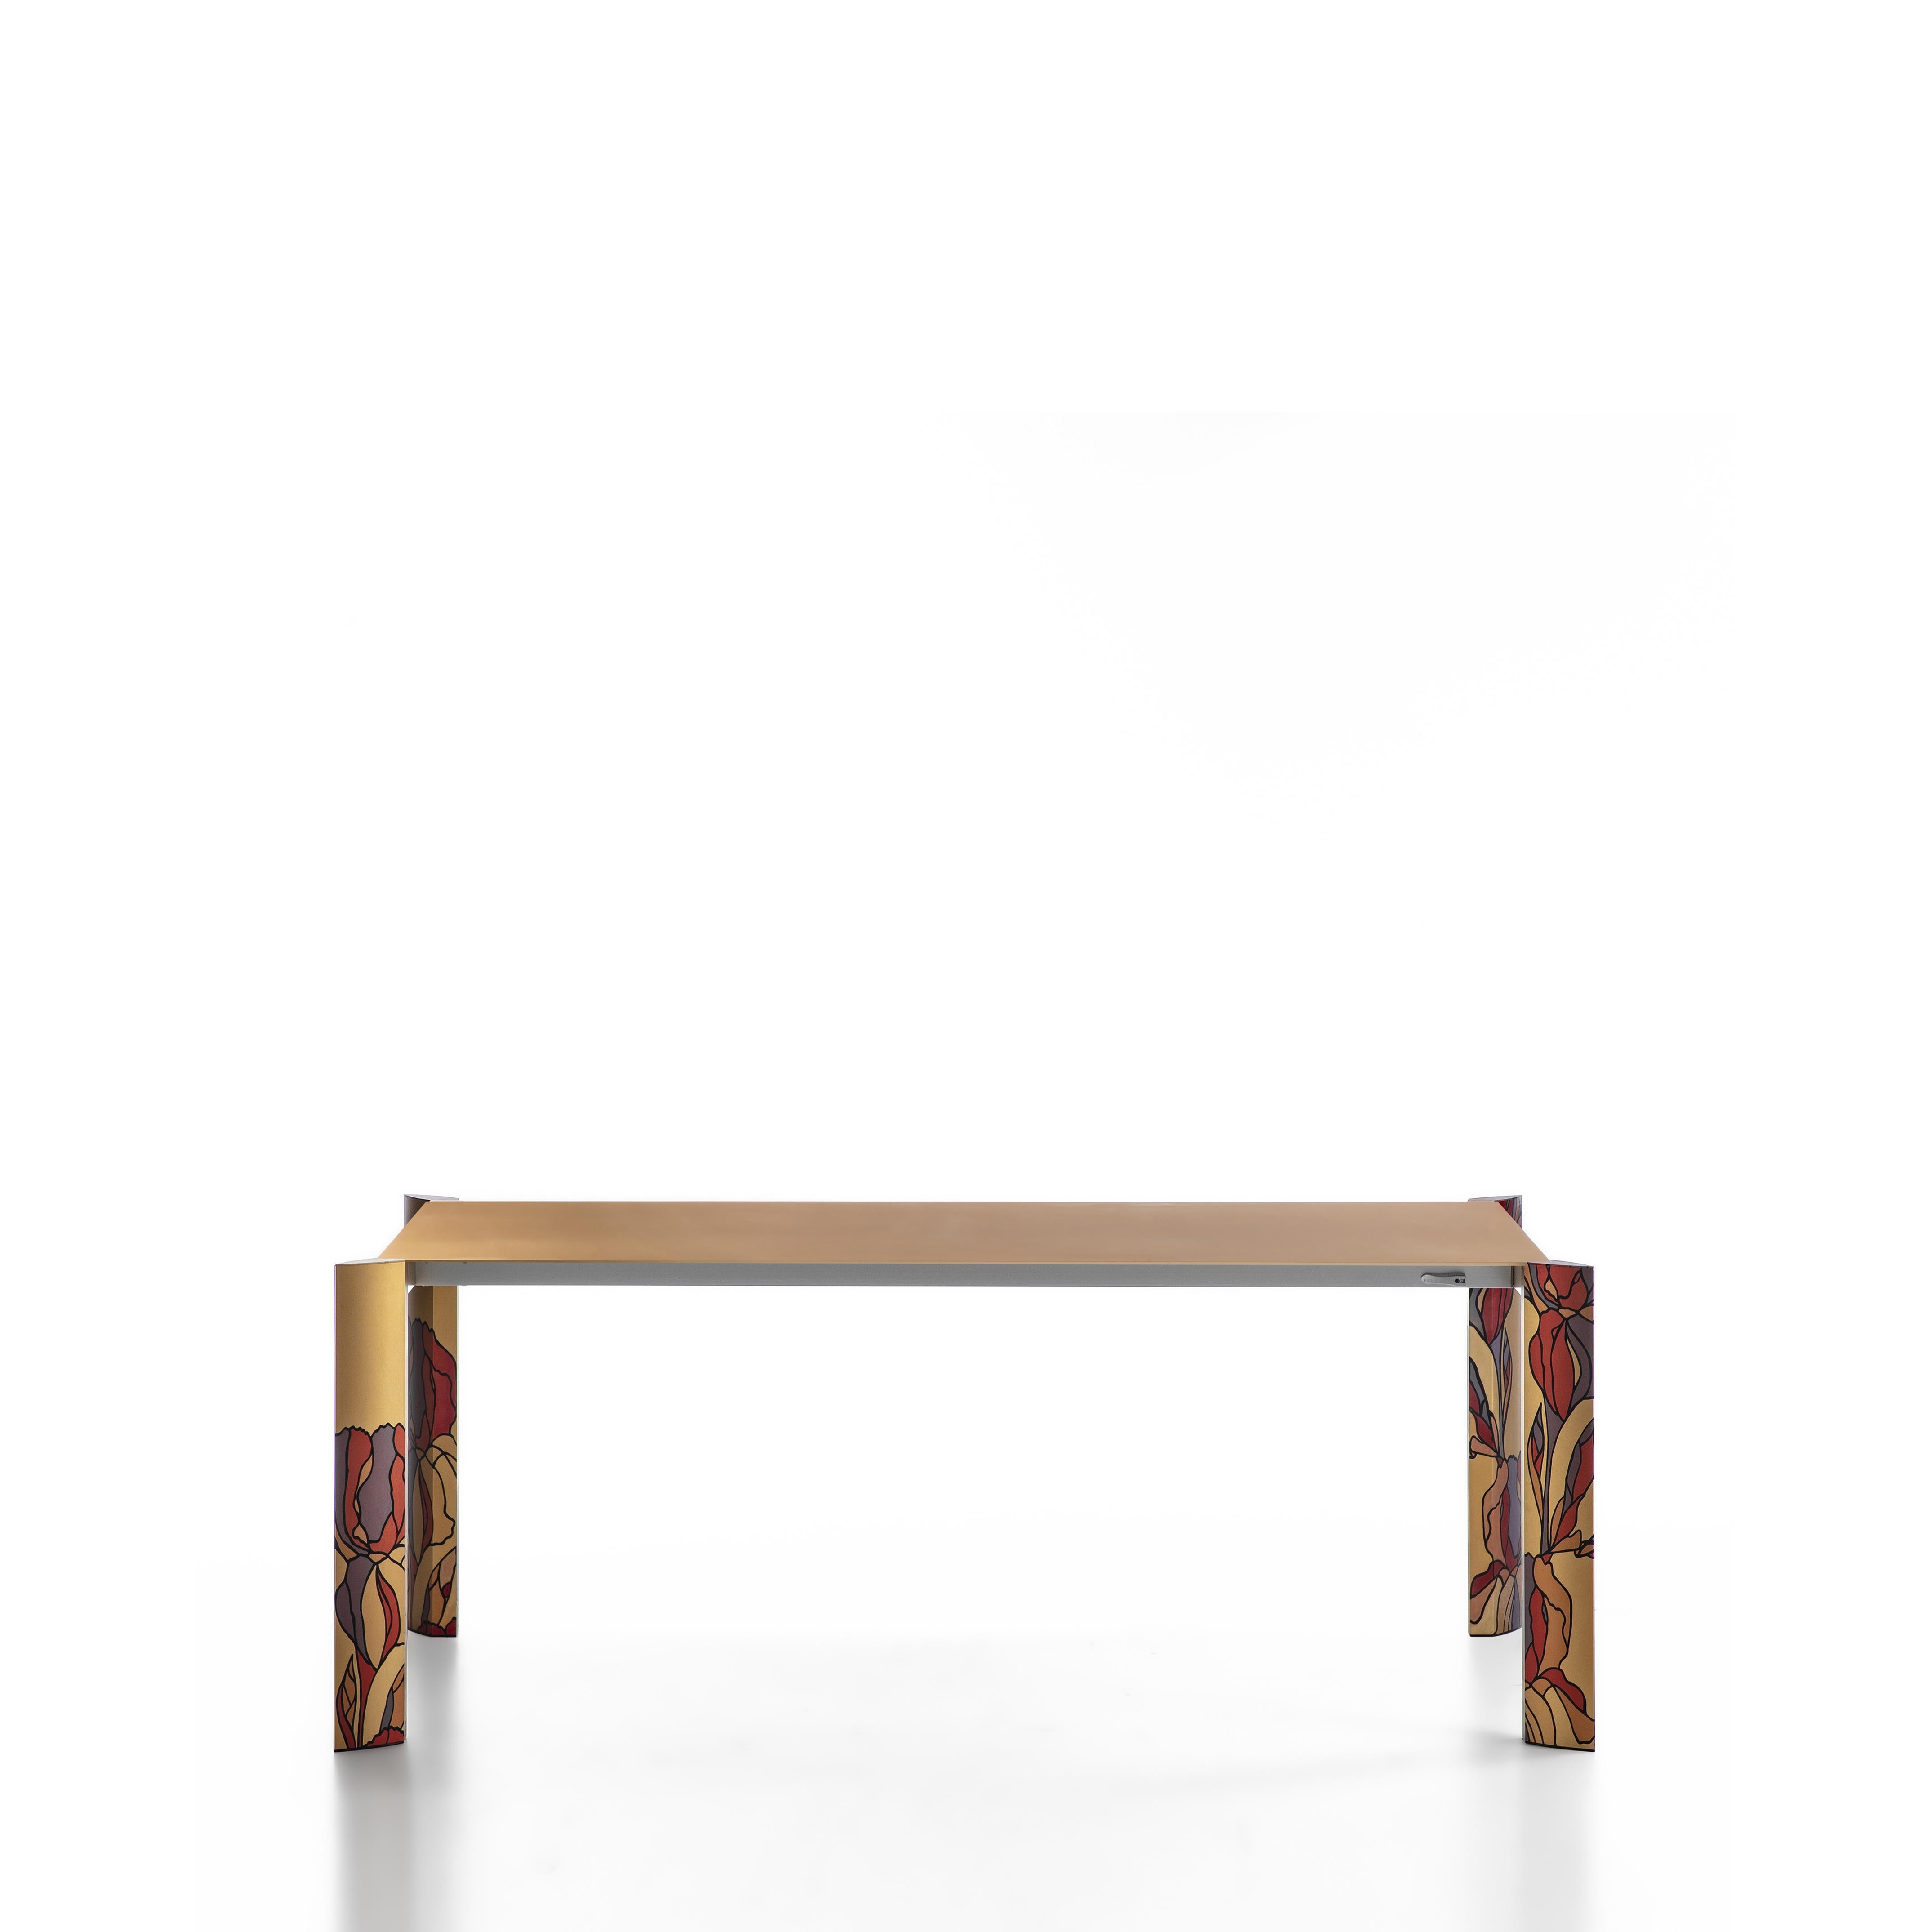 Distinguished by four extraordinarily patterned extruded legs covered with printed corn paper, this dining table exudes the utmost style and originality. Entirely fashioned of recycled aluminum, it features an extendible top that opens up to a